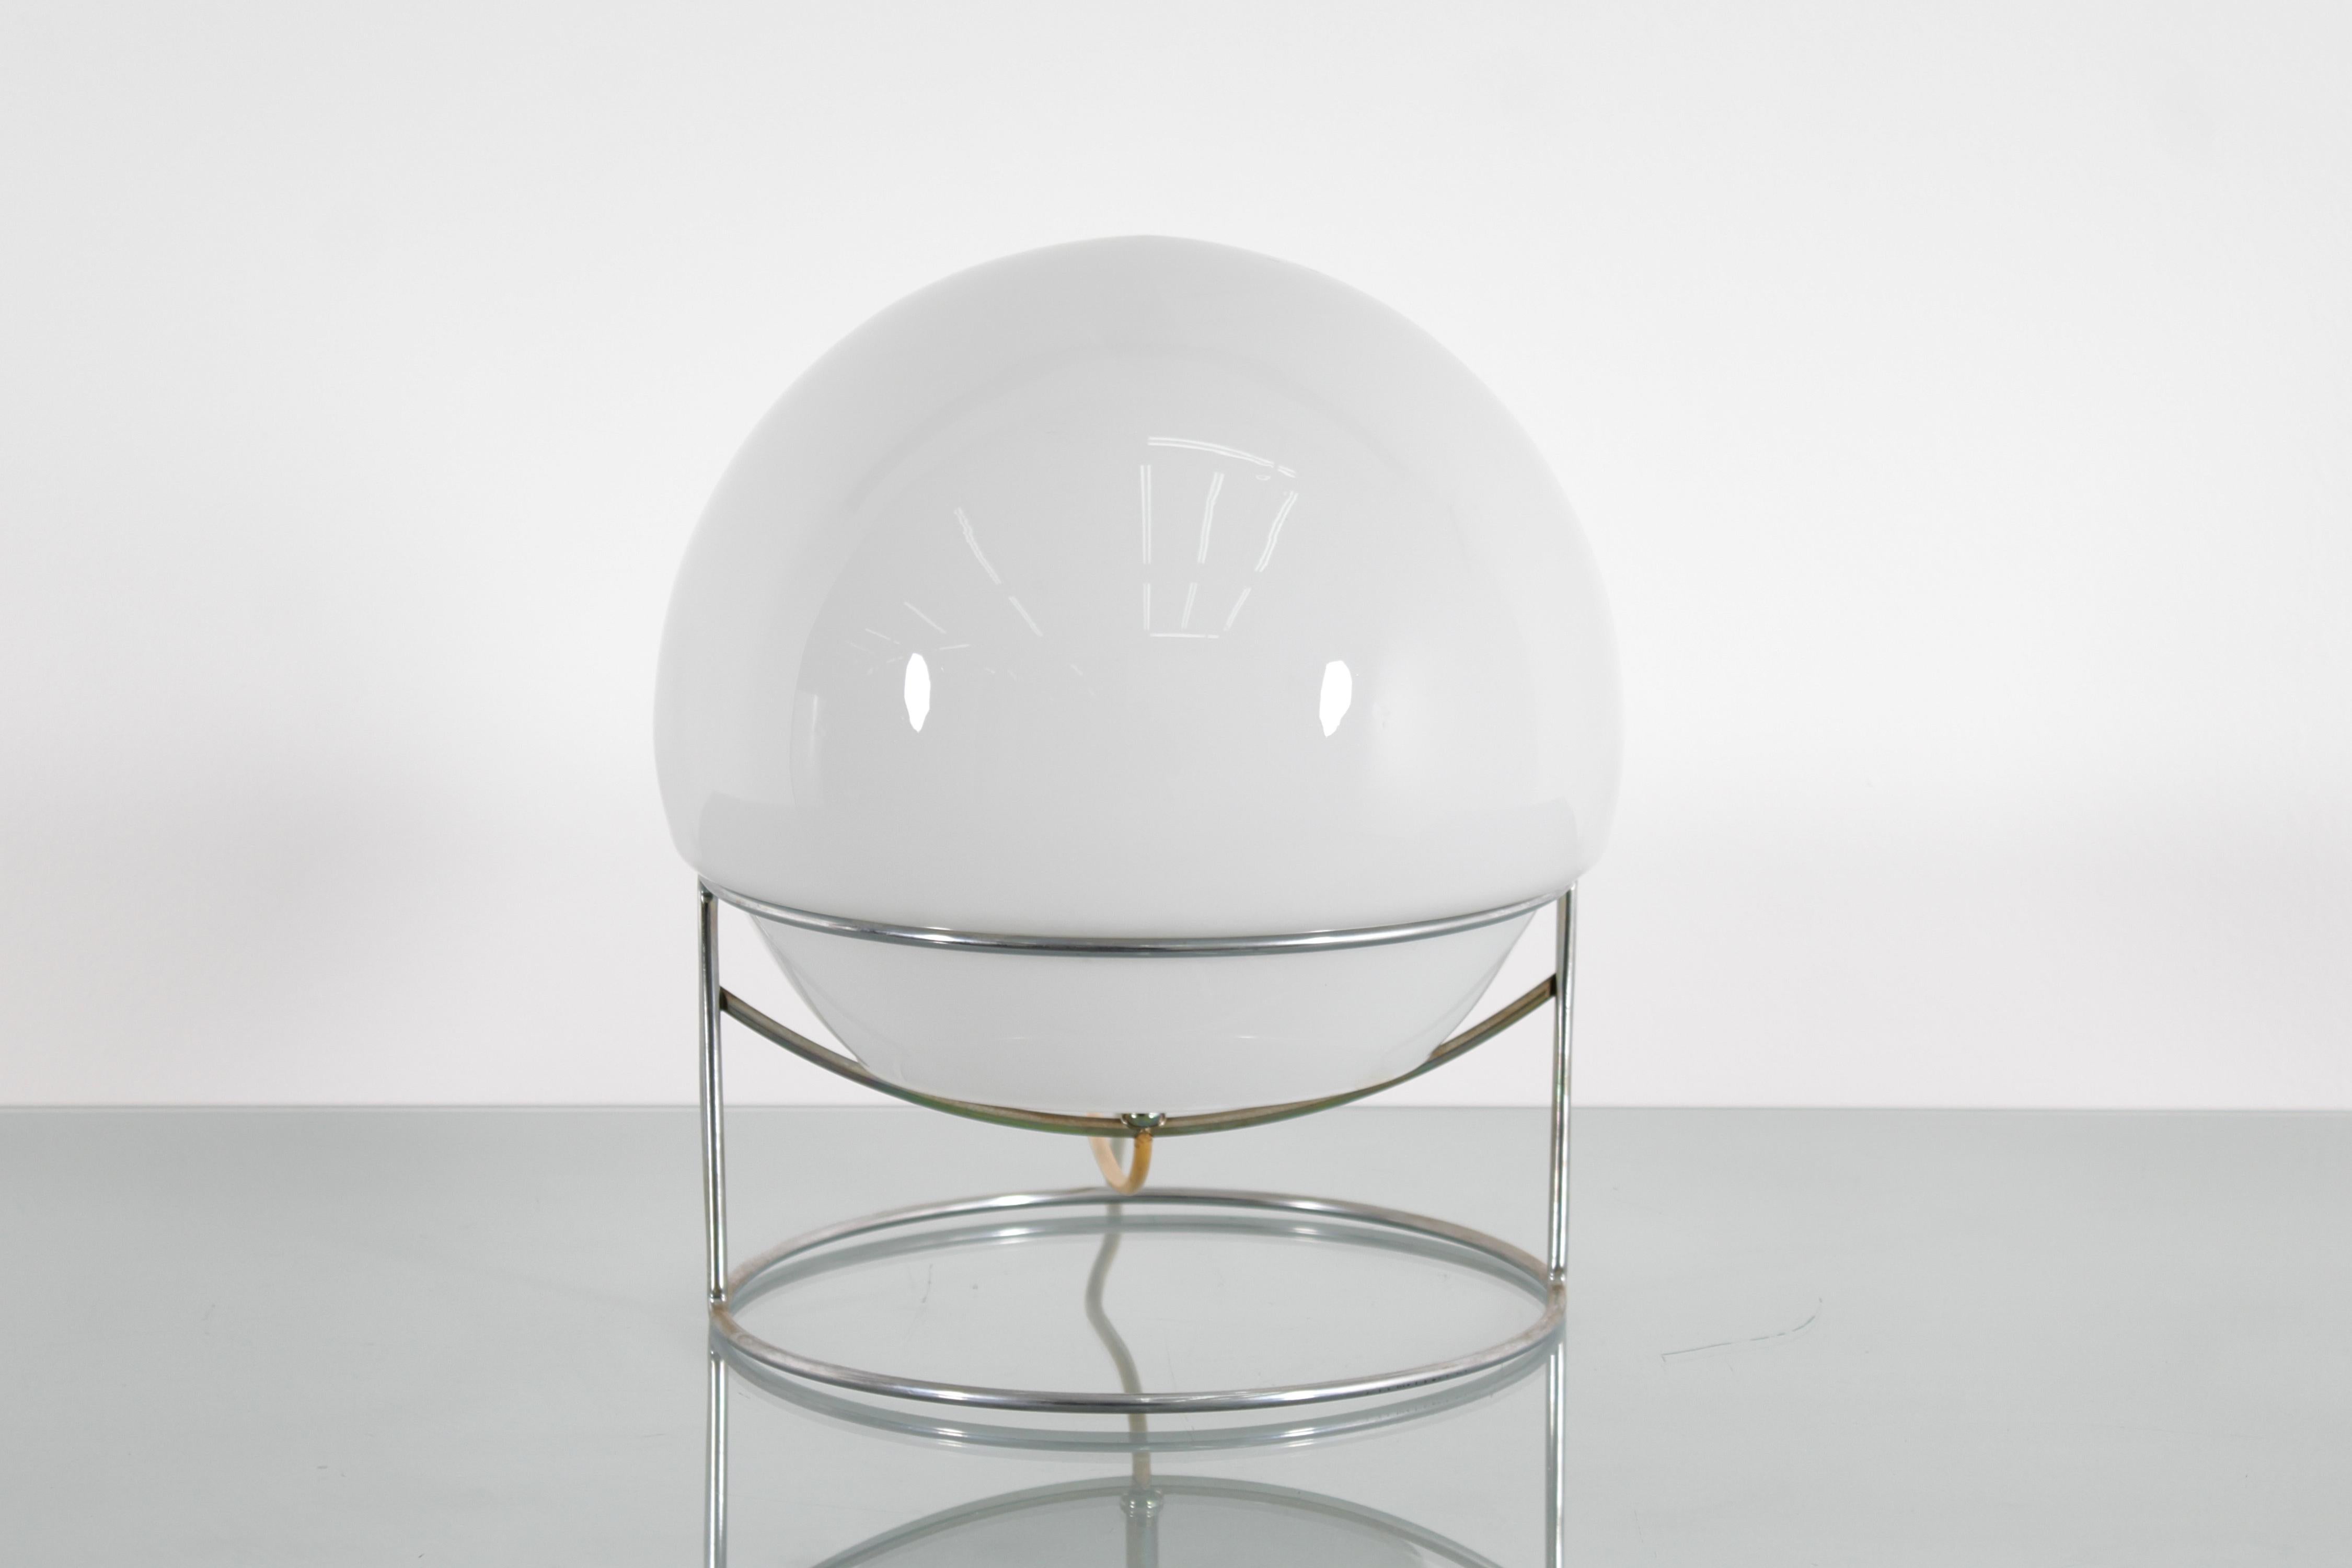 Very beautiful example of a Space Age table lamp with a circular structure in chromed steel rod on which the hemispherical shaped diffuser in milky white glass is housed. Italian production in the style of Carlo Nason, from the 70s.